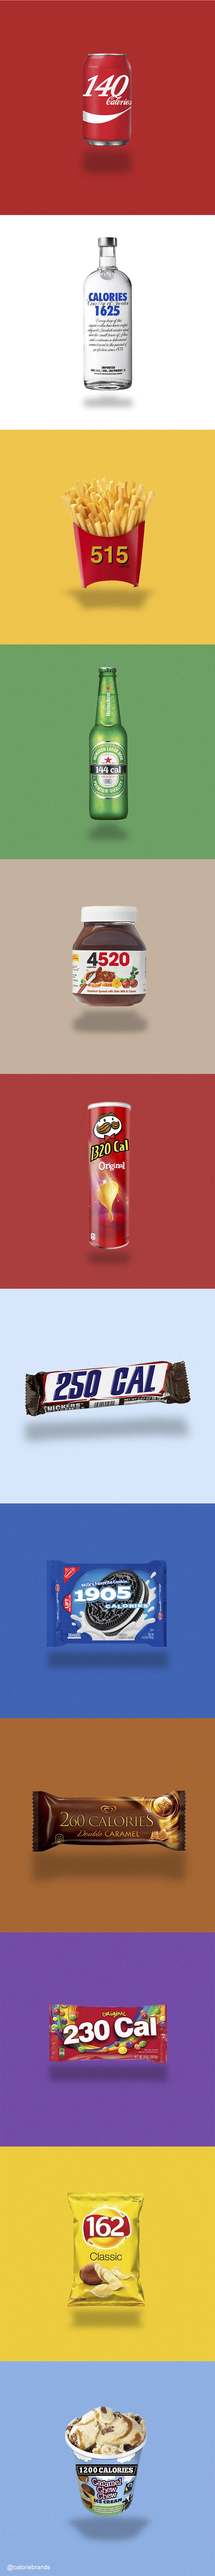 Food Logos Redesigned To Show Calorie Count